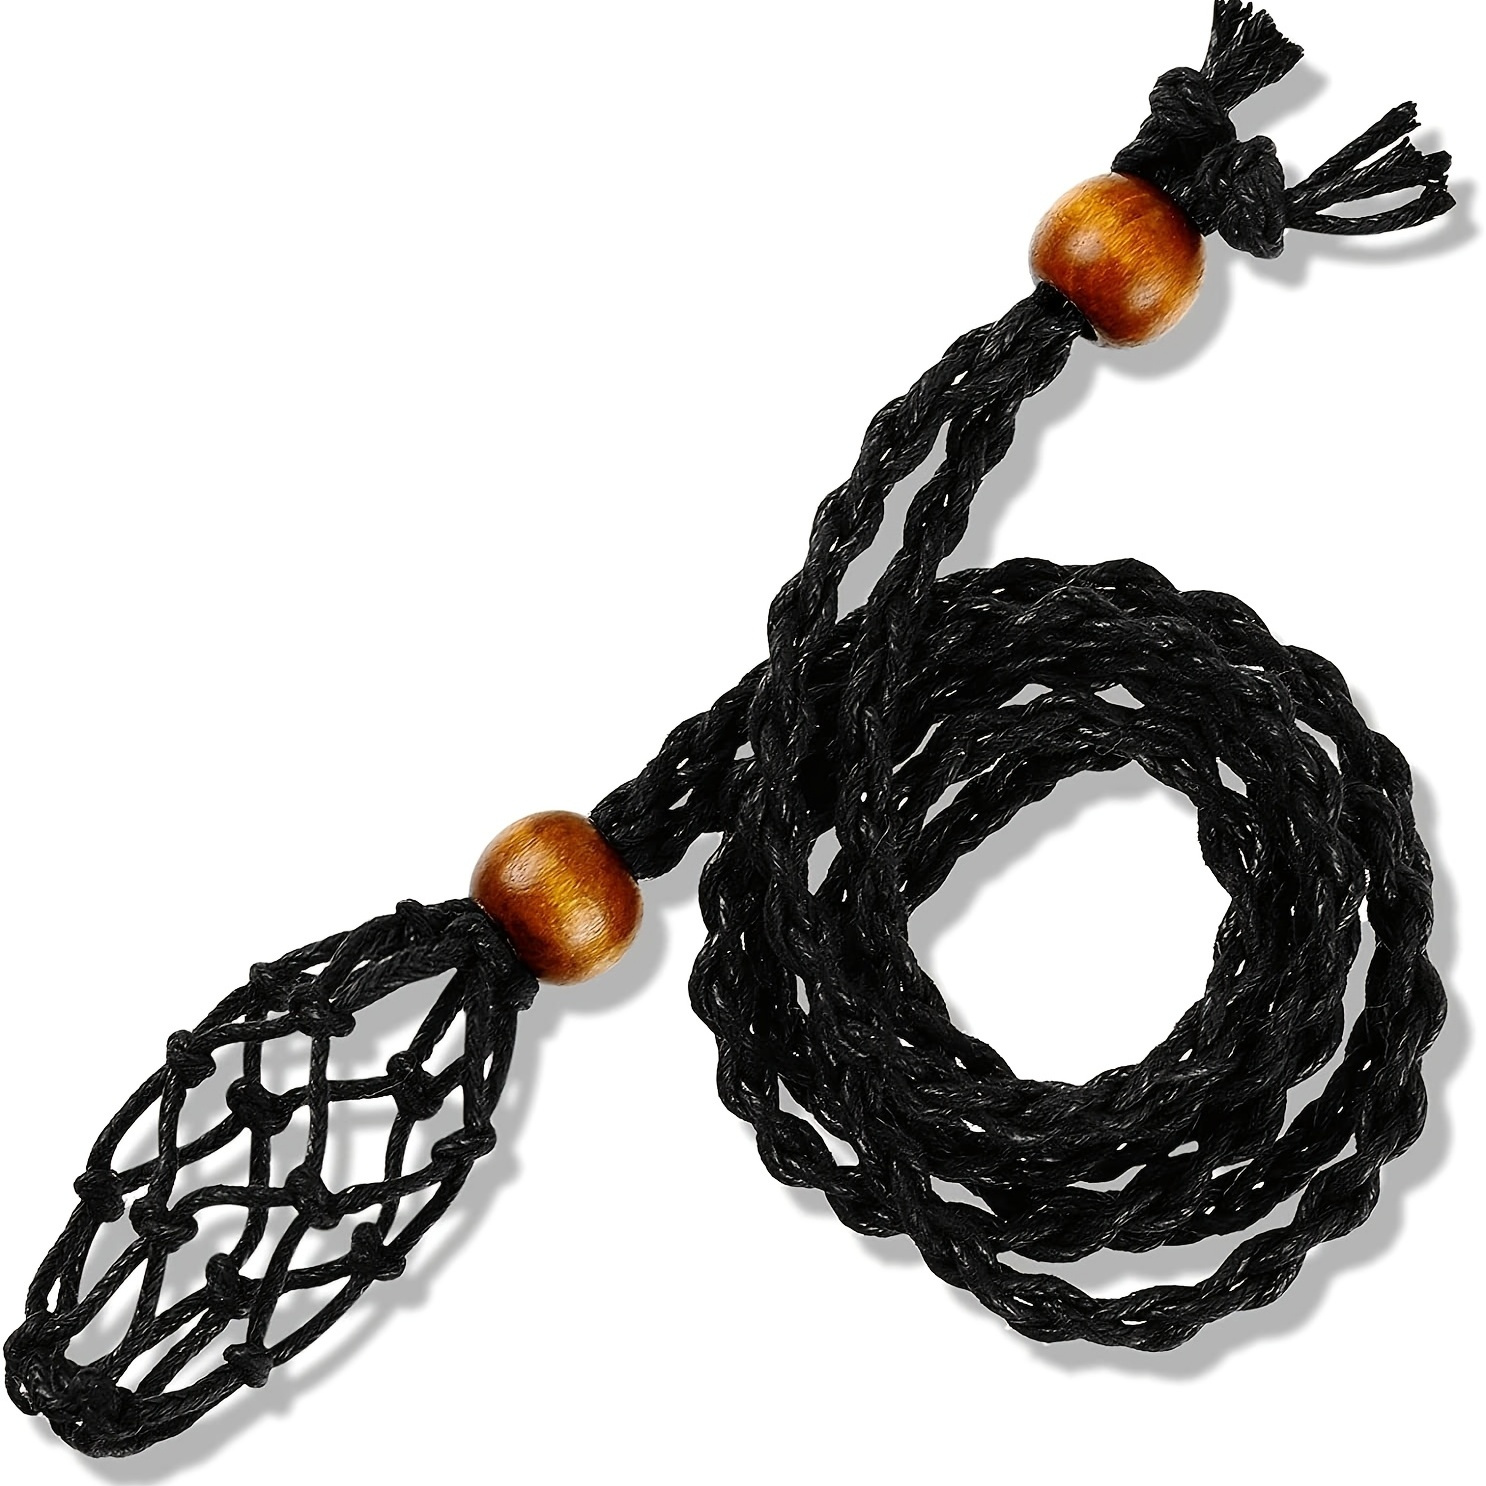 Natural Agate Net Pendant With Healing Crystal Necklace And Stone Holder  For Jewelry Making Hand Woven Cord Rope With Creative Personality From  Cardhxj, $10.15